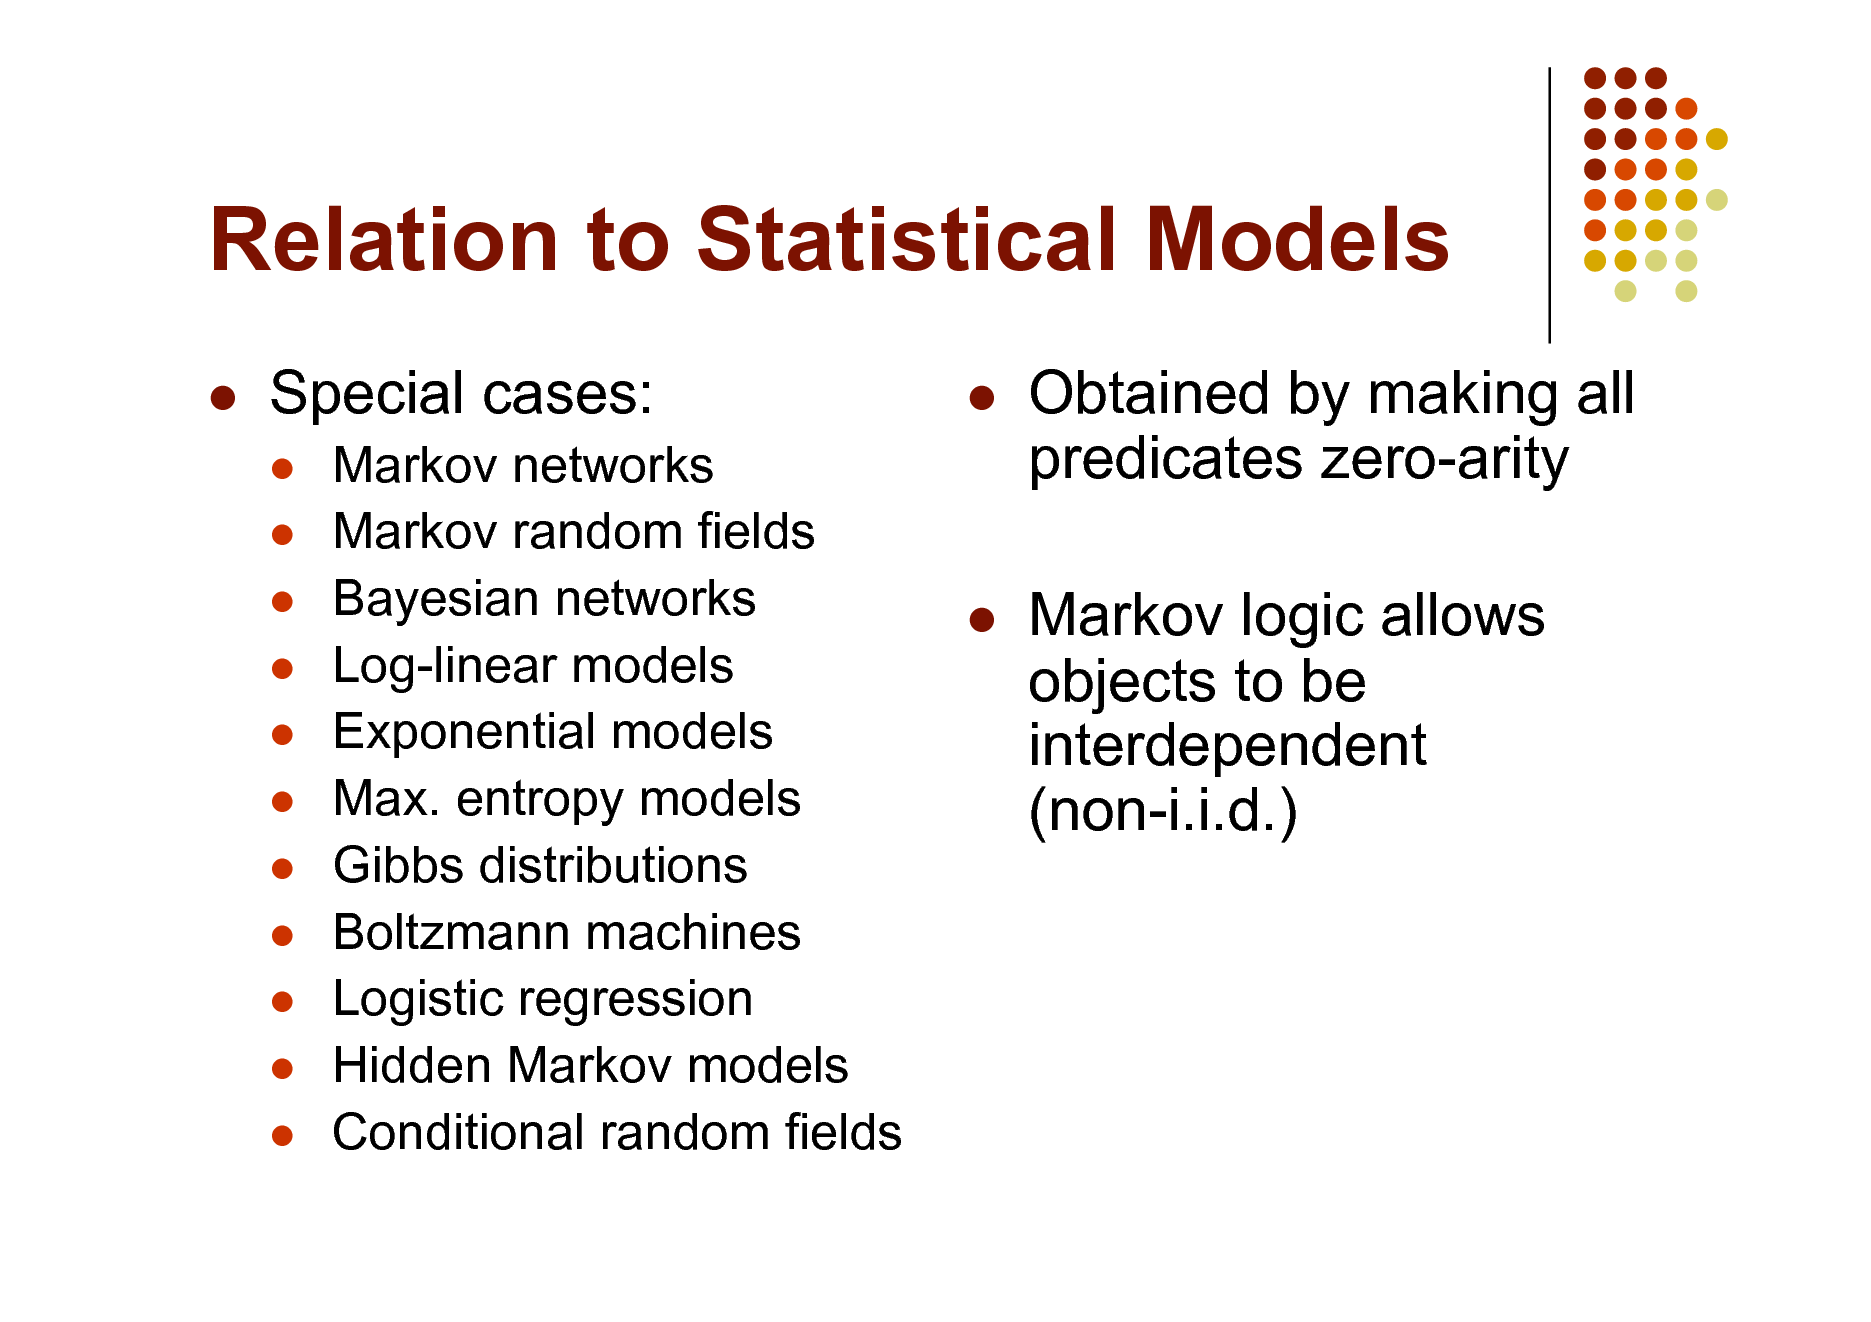 Slide: Relation to Statistical Models


Special cases:
          



Markov networks Markov random fields Bayesian networks Log-linear models Exponential models Max. entropy models Gibbs distributions Boltzmann machines Logistic regression Hidden Markov models Conditional random fields

Obtained by making all predicates zero-arity Markov logic allows objects to be interdependent (non-i.i.d.)



